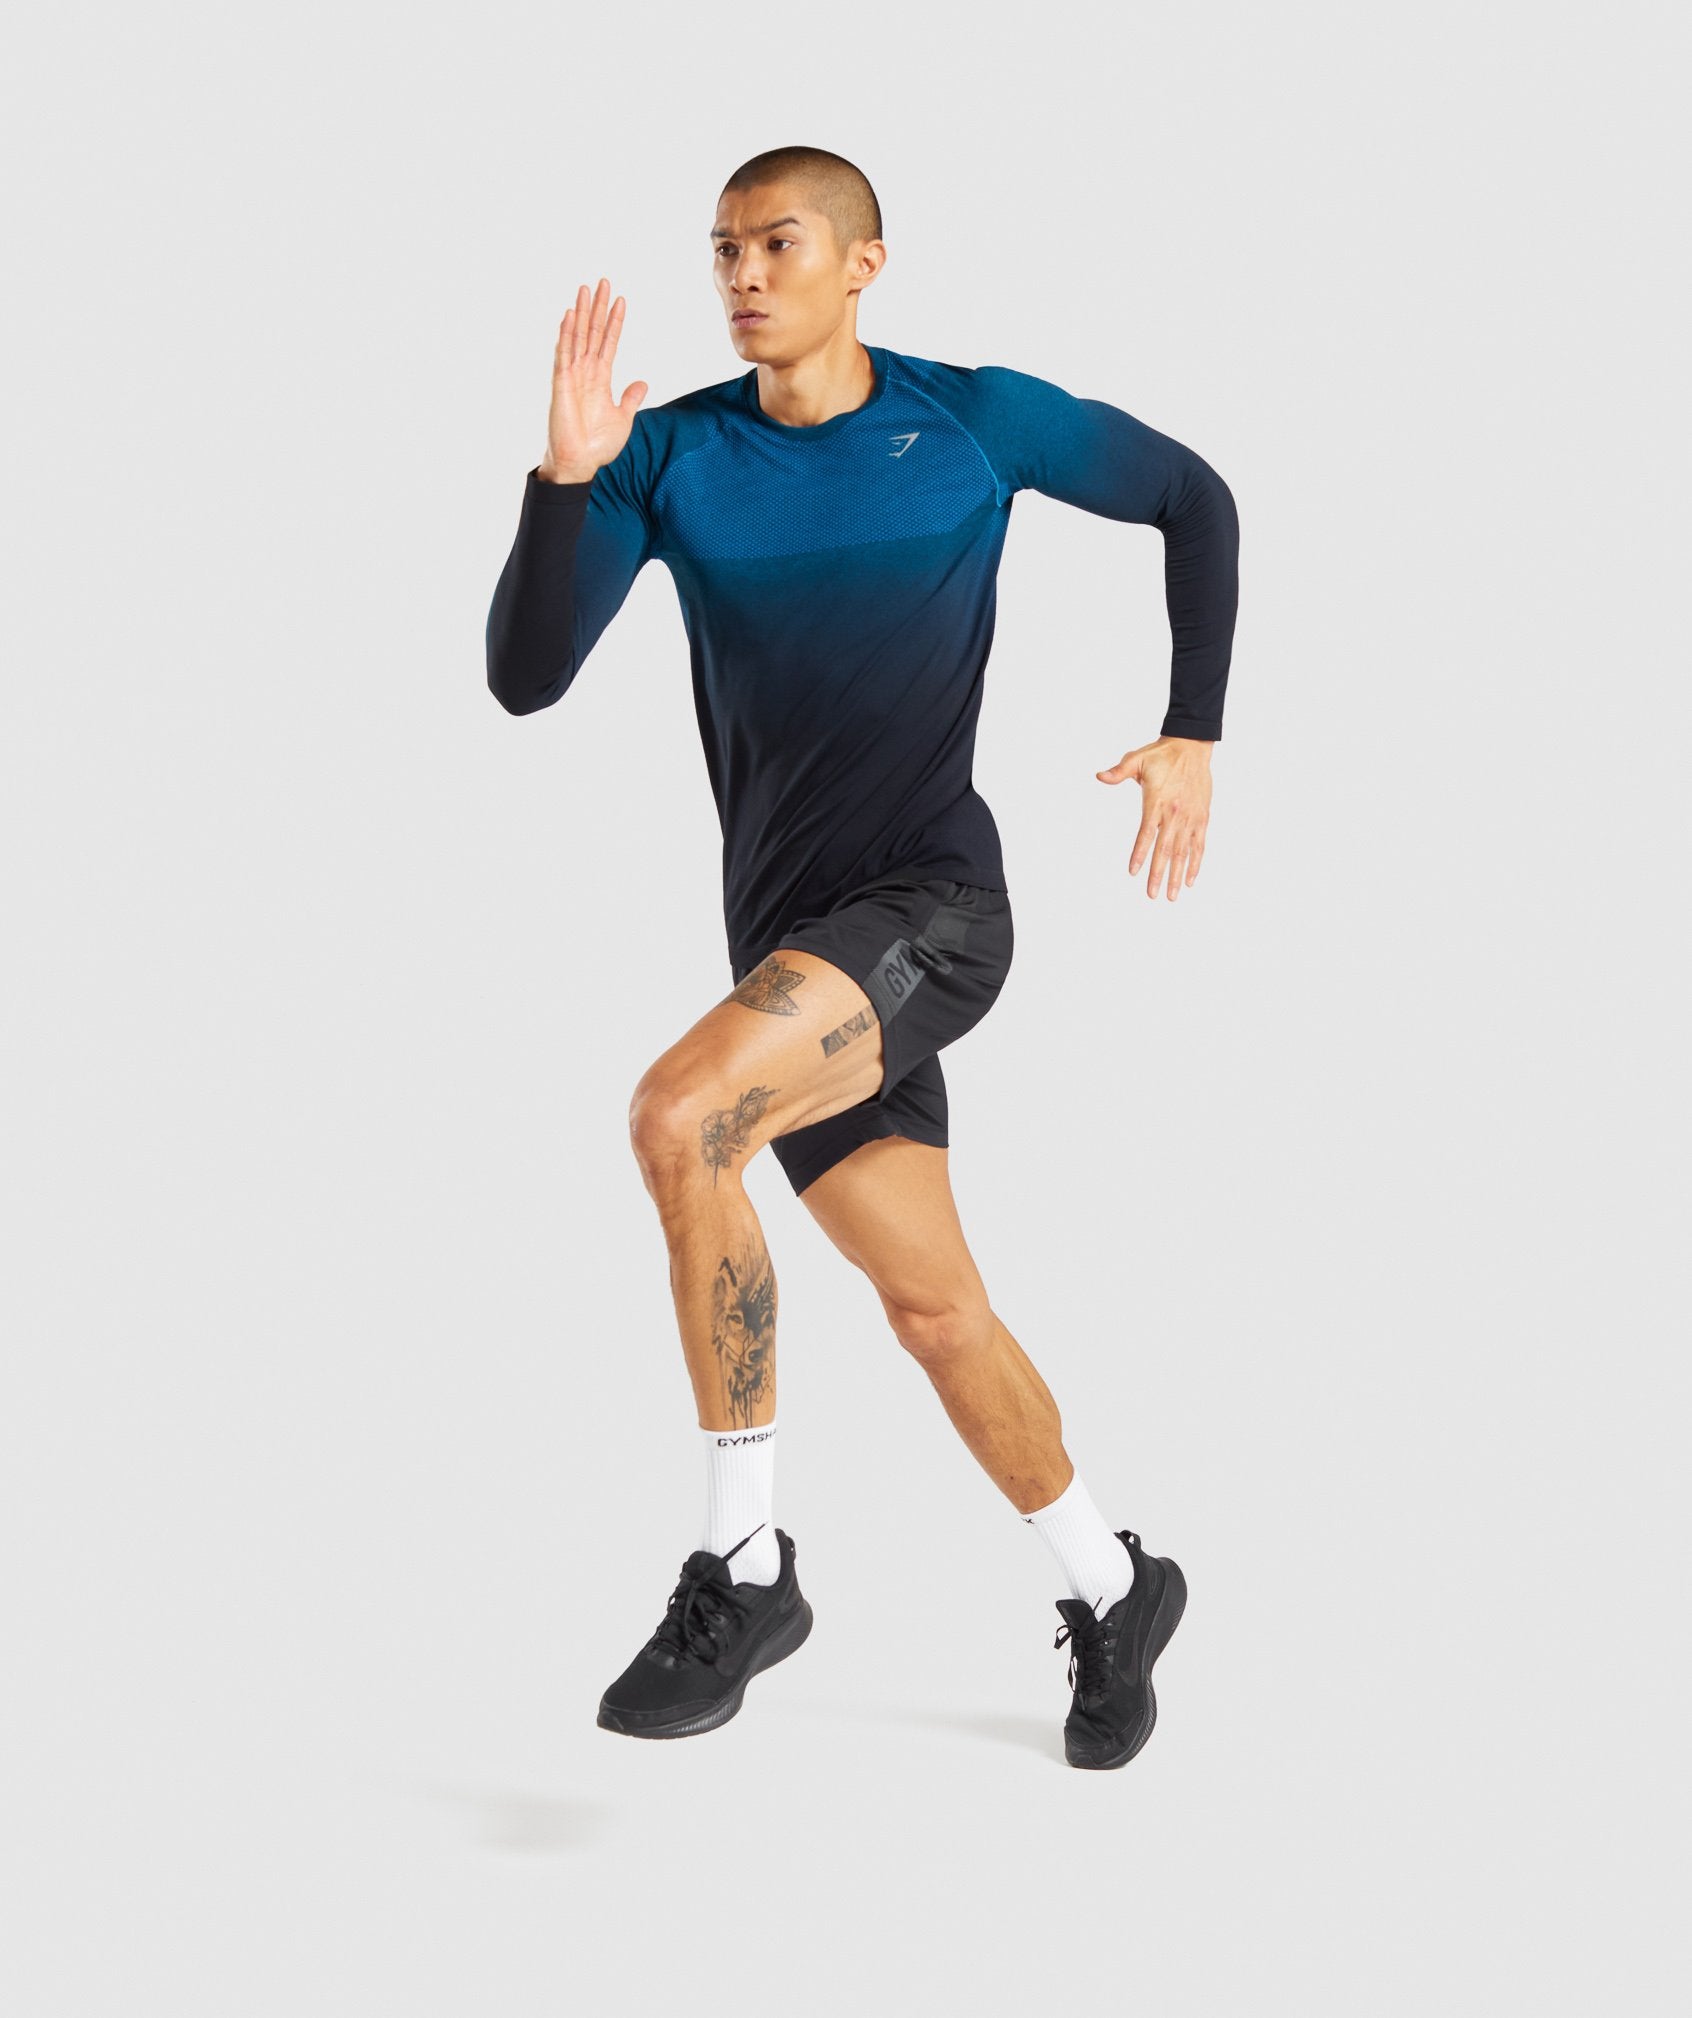 Vital Ombre Seamless Long Sleeve T-Shirt in Teal Marl/Black - view 4